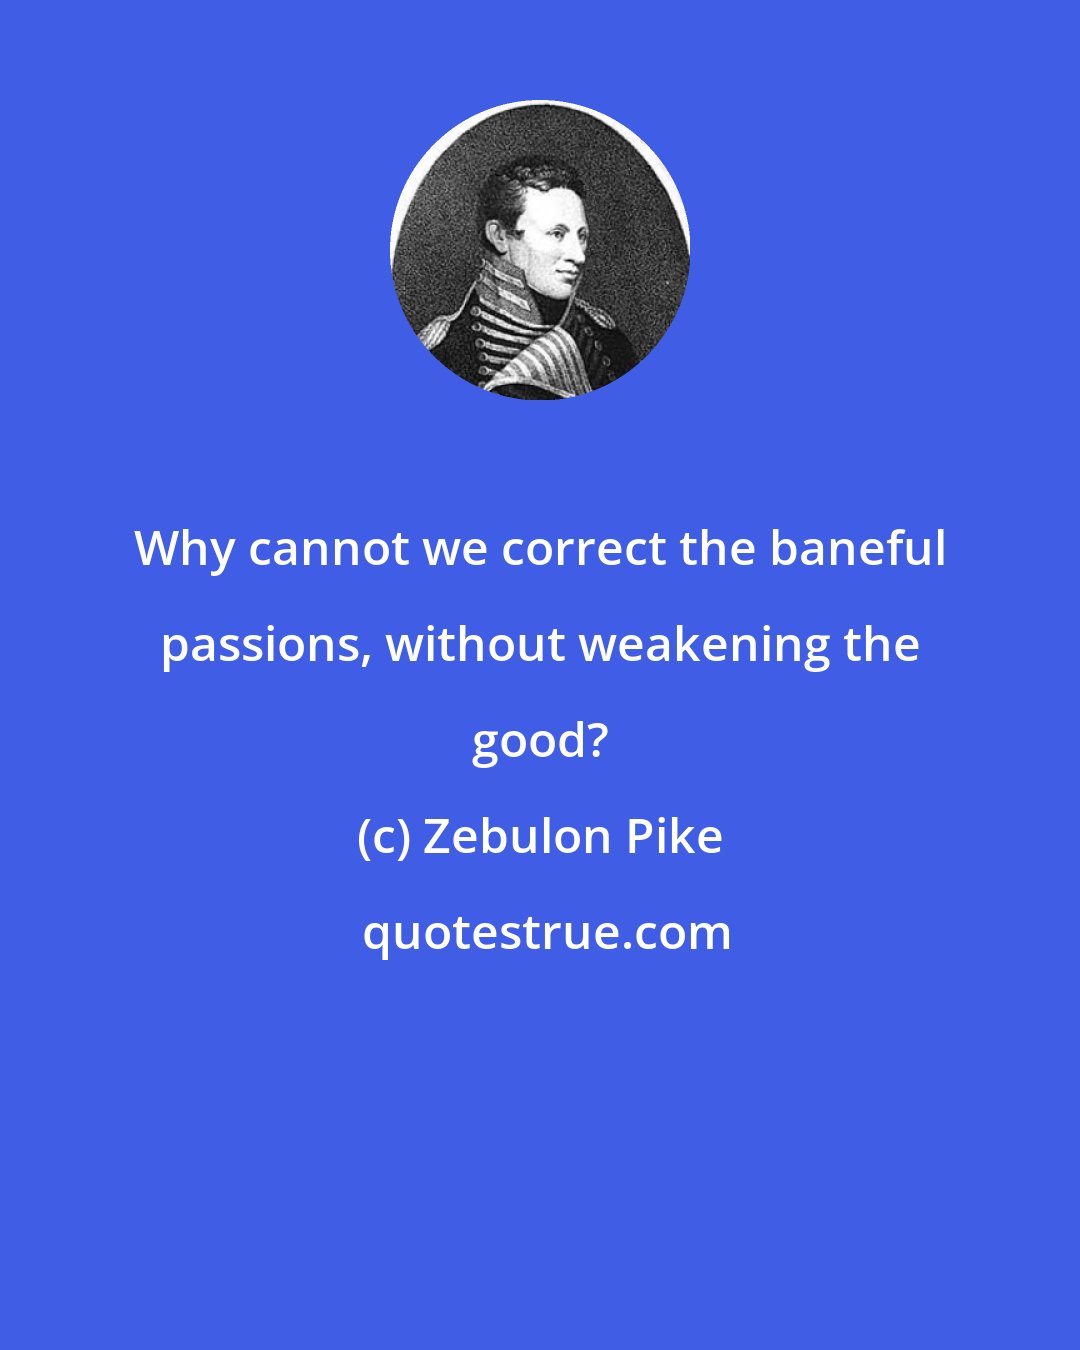 Zebulon Pike: Why cannot we correct the baneful passions, without weakening the good?